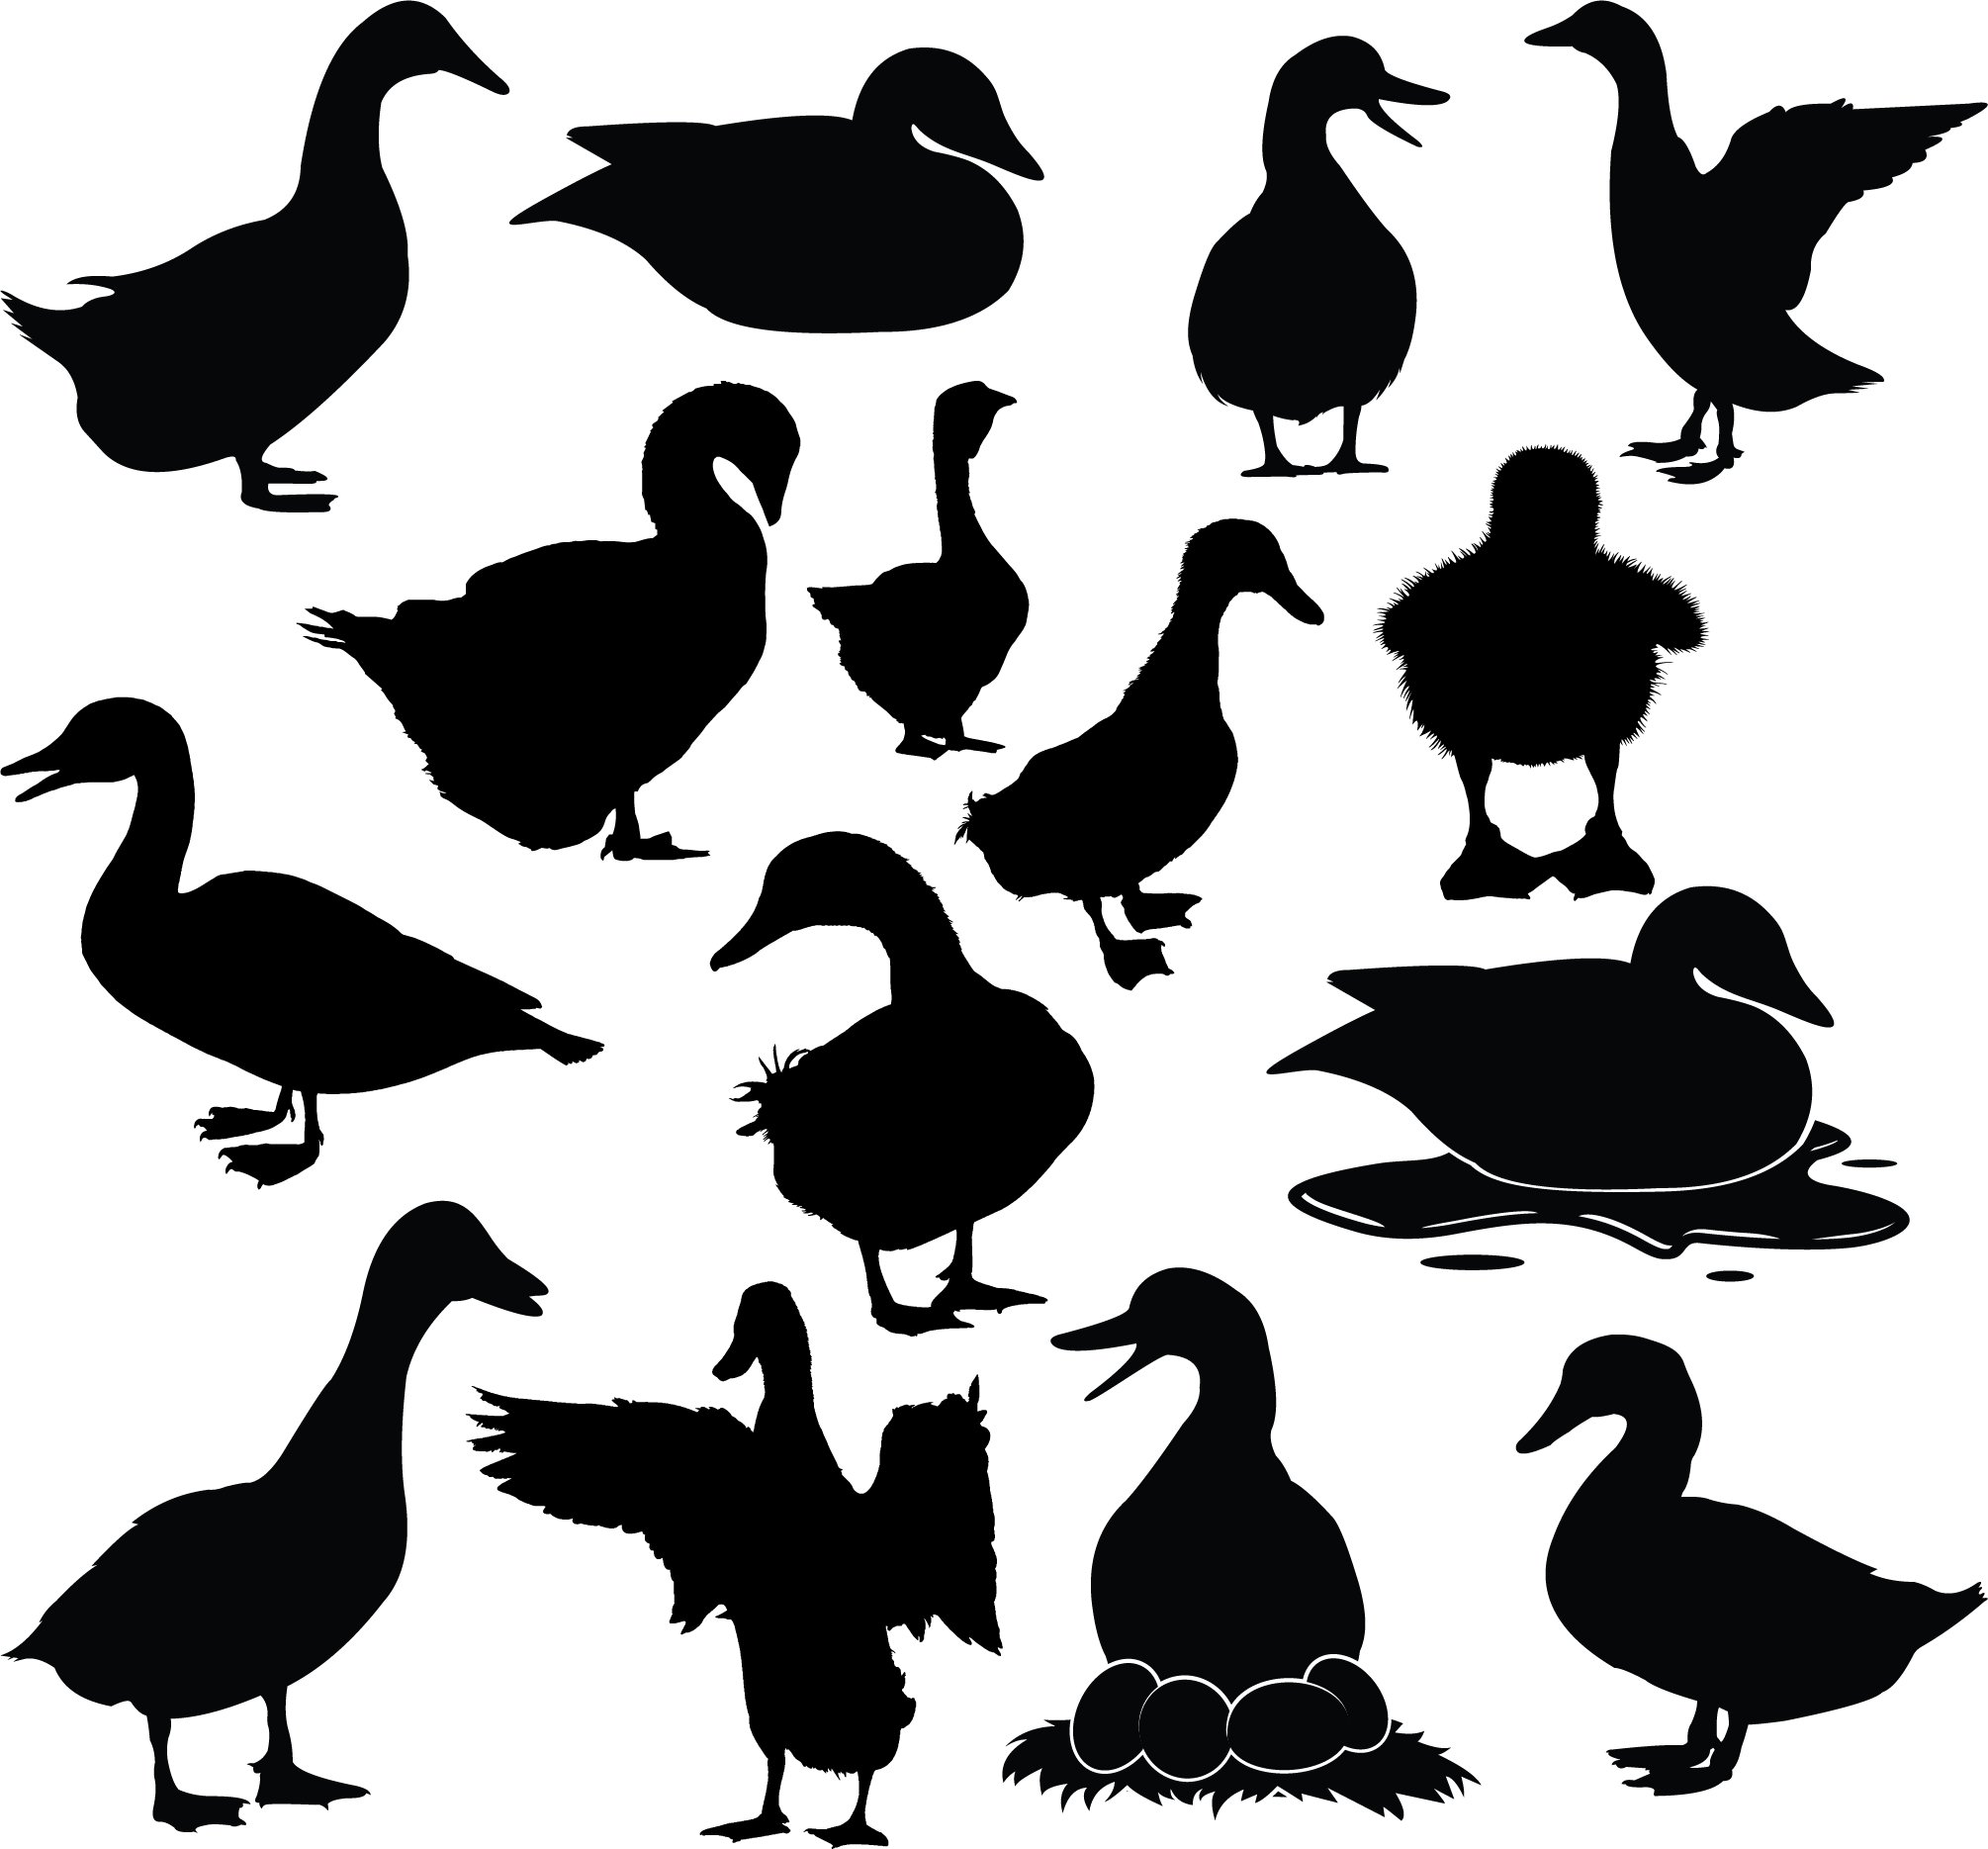 Duck Silhouette Clipart cover image.